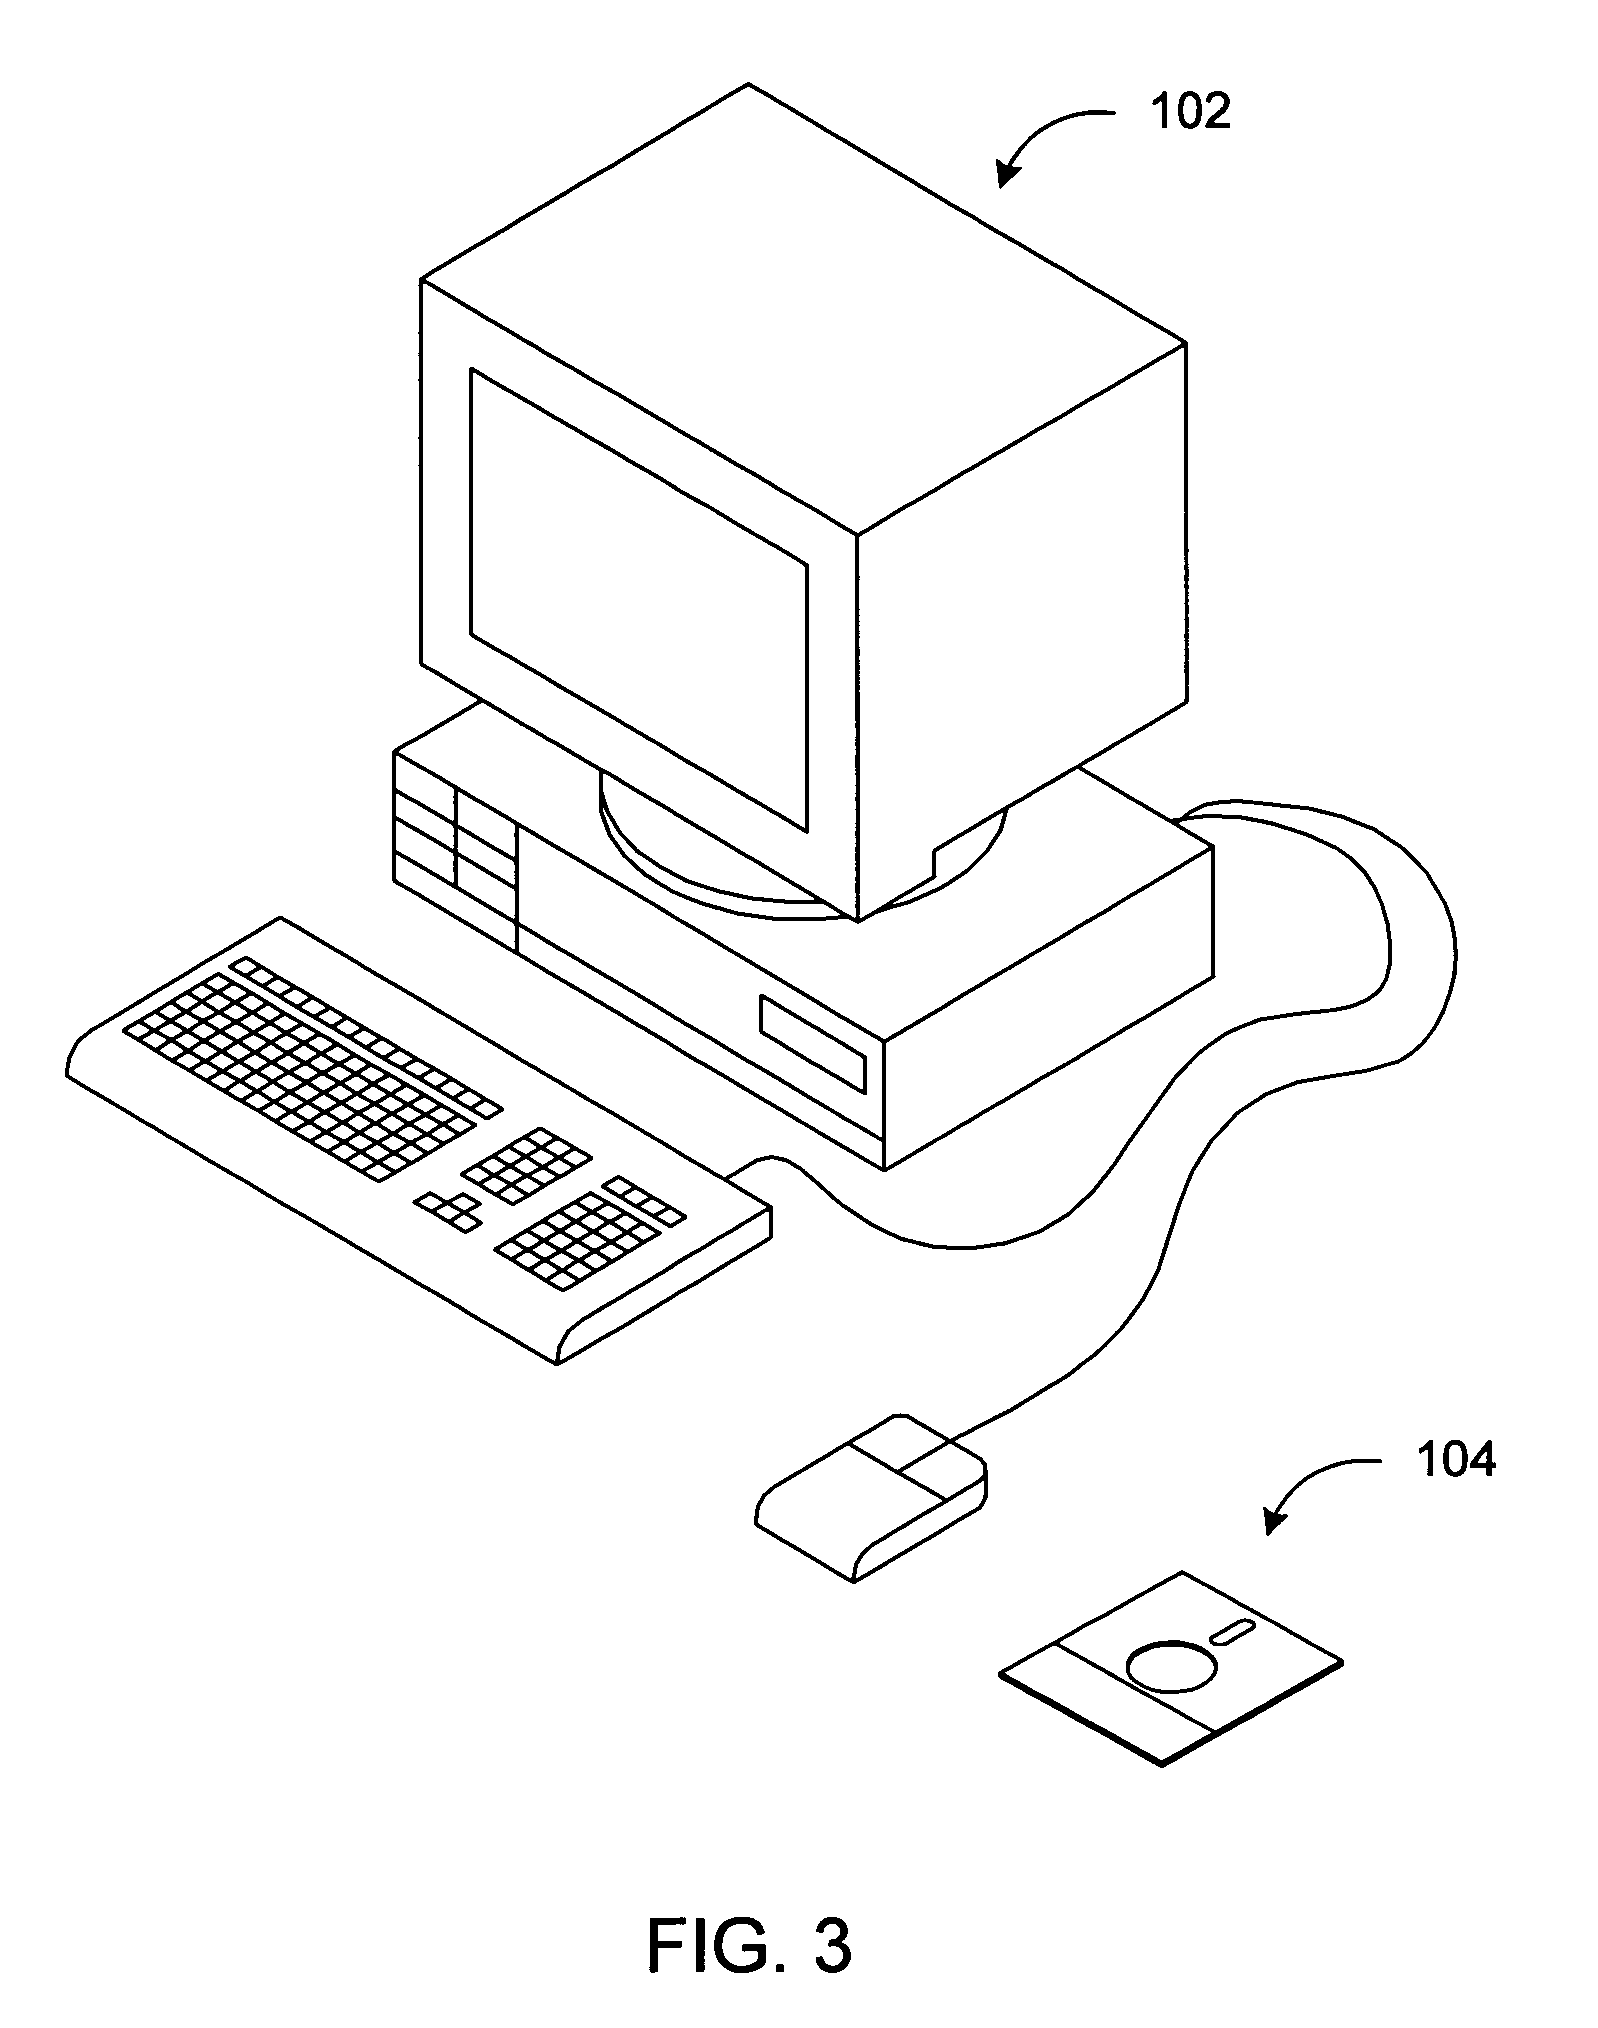 System and method for locating color and pattern match regions in a target image